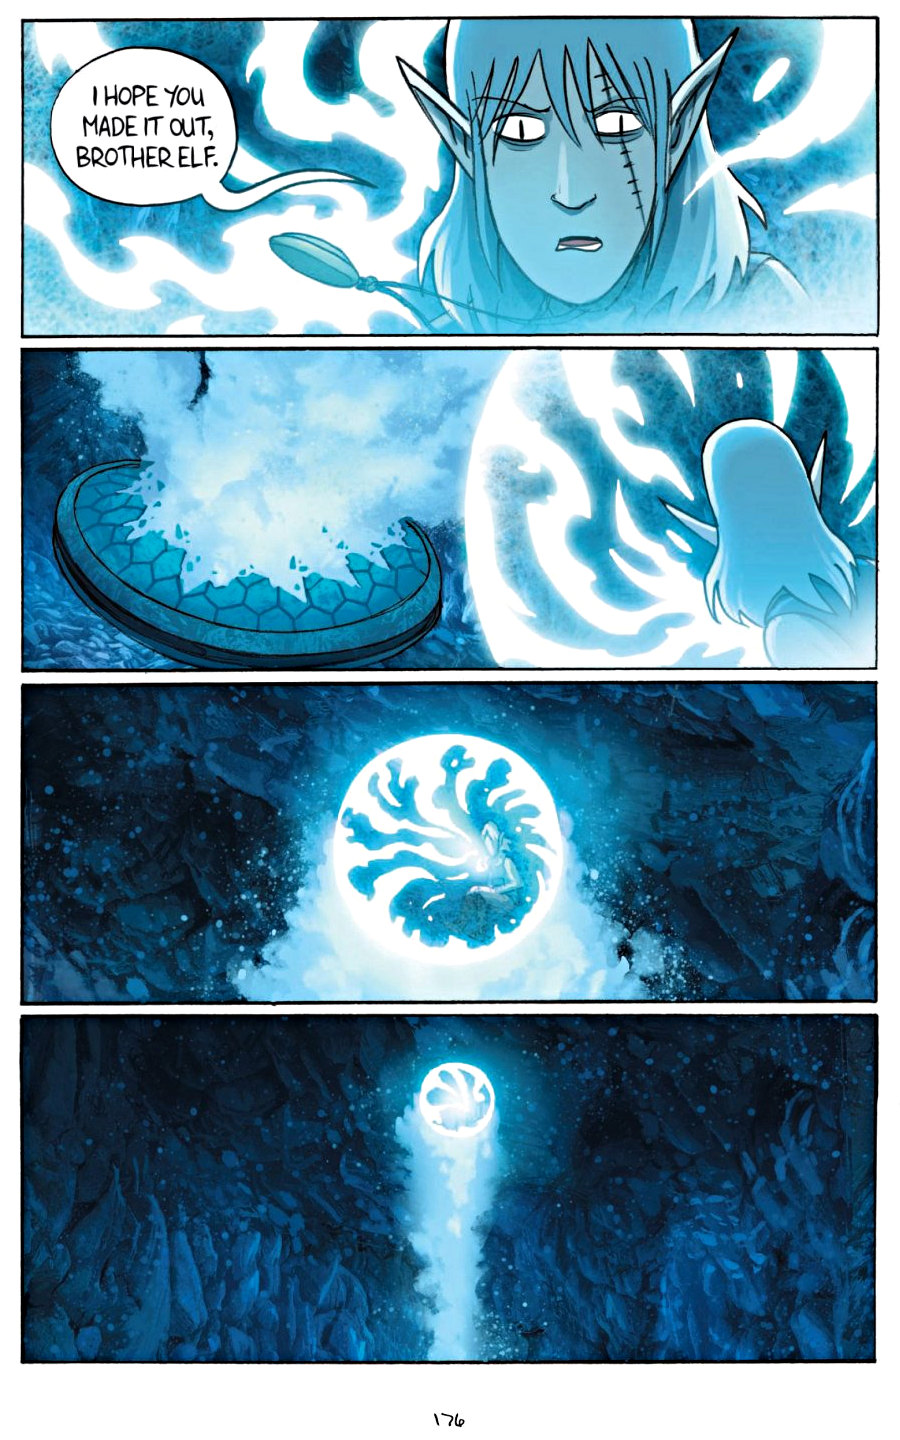 page 176 of amulet 7 firelight graphic novel